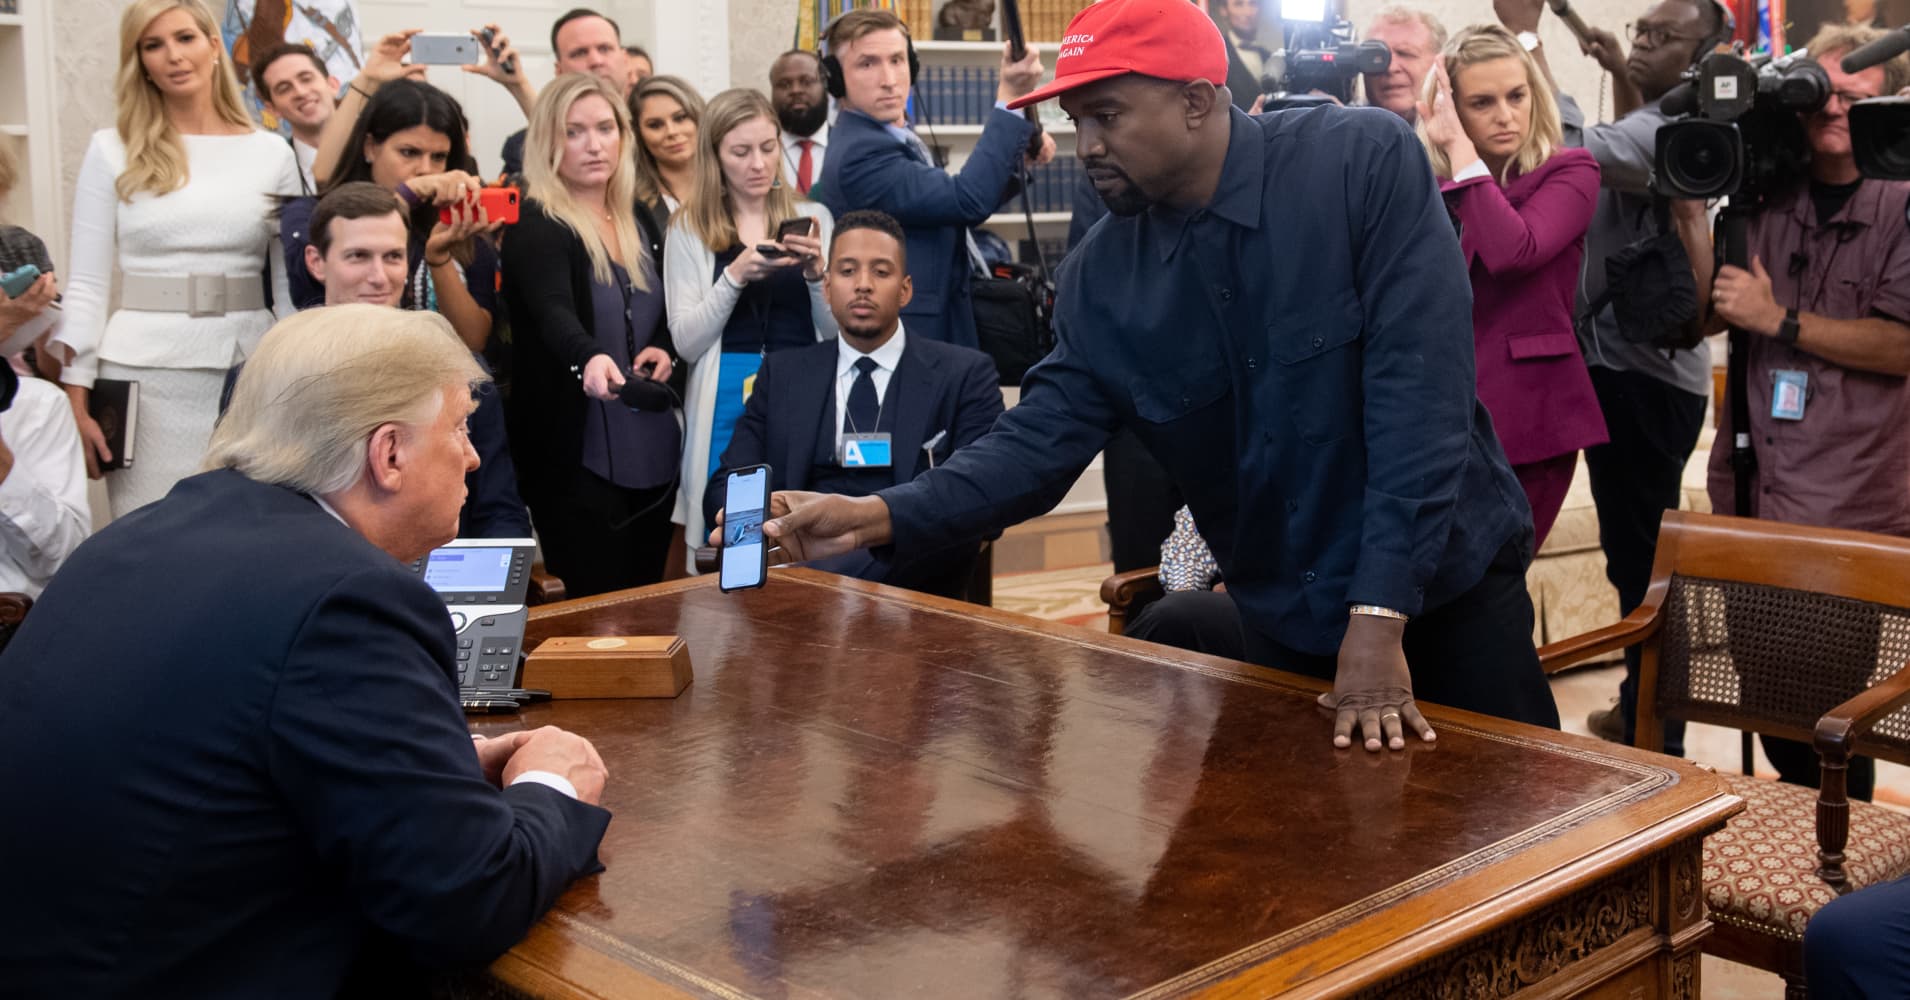 The 'iPlane 1' that Kanye West proposed to Trump was a Detroit student's graduate thesis